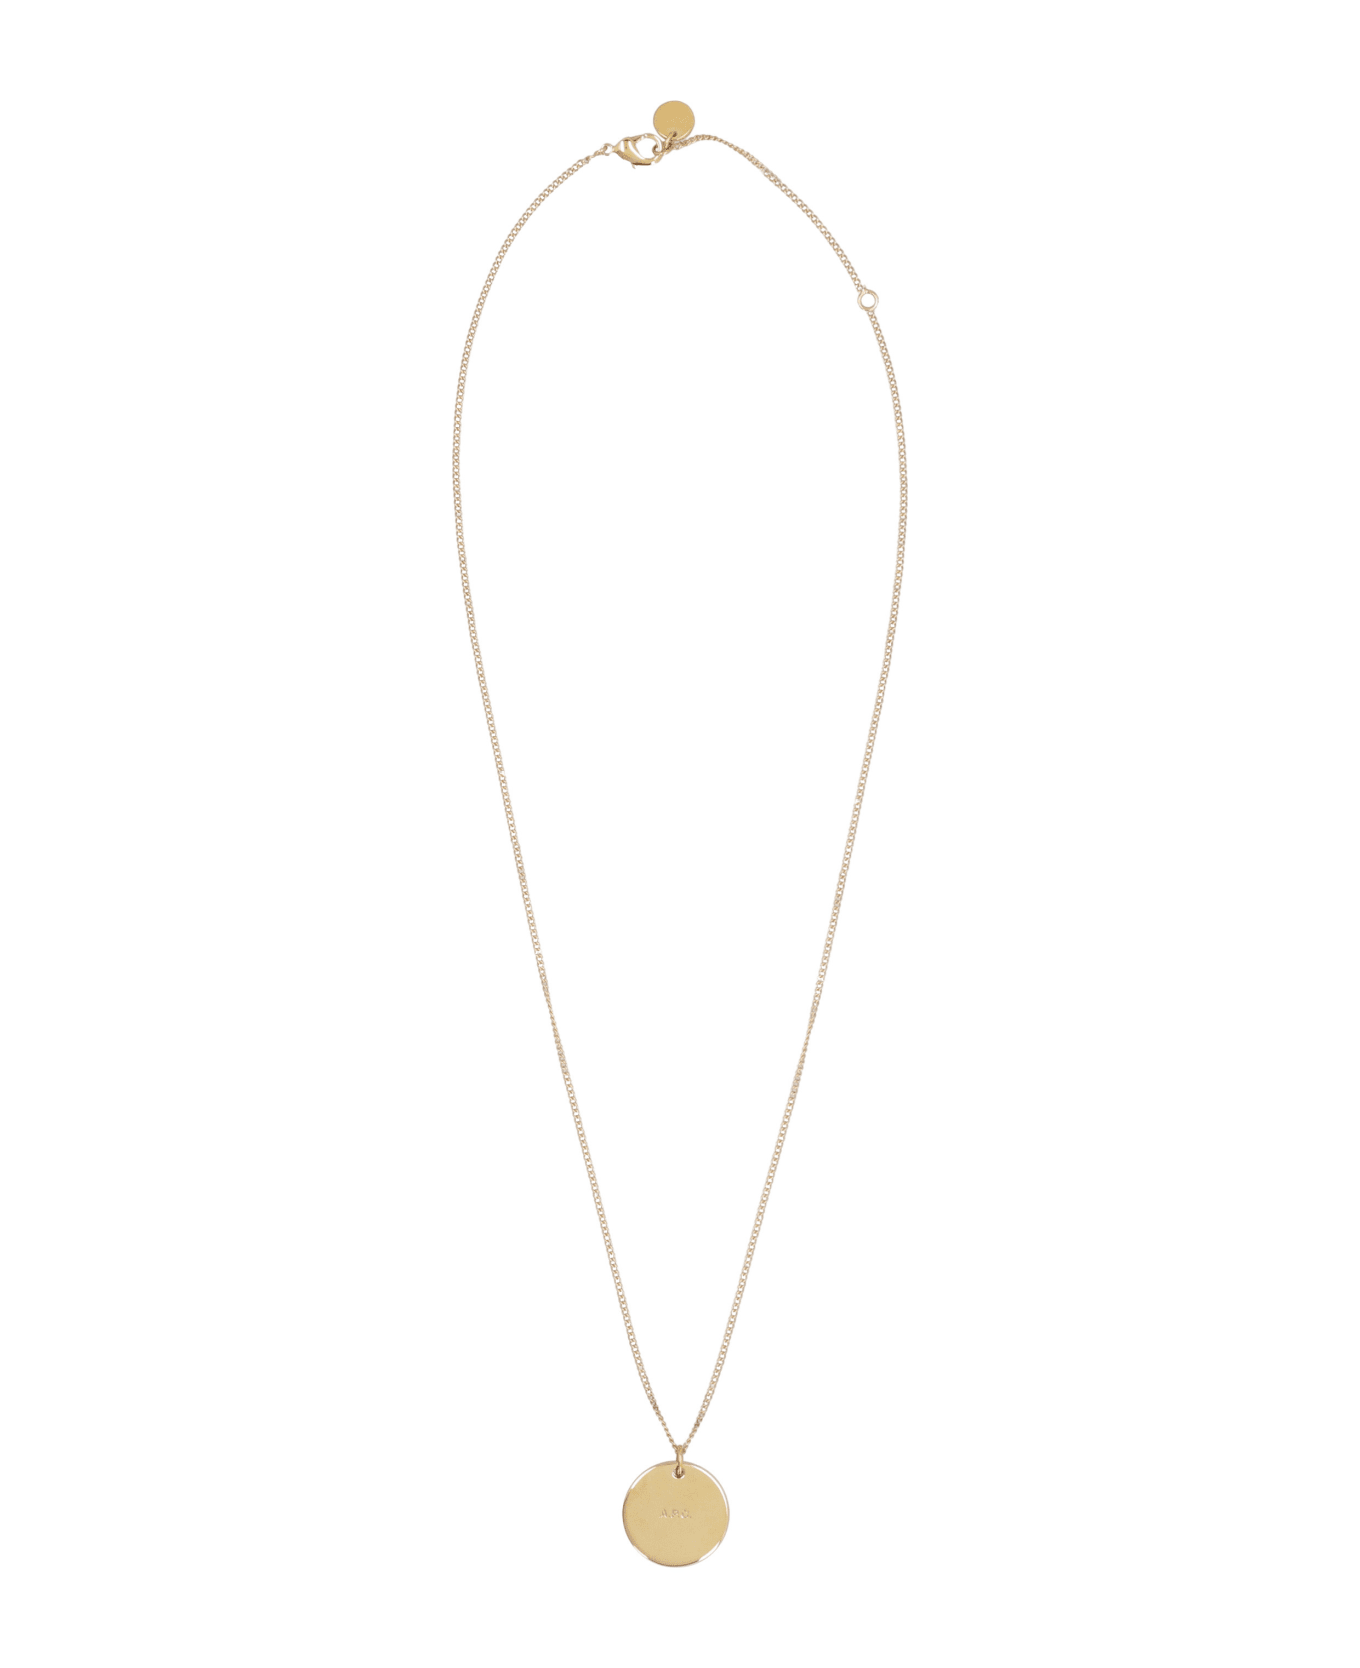 A.P.C. Eloi Necklace With Pendant - Gold ネックレス